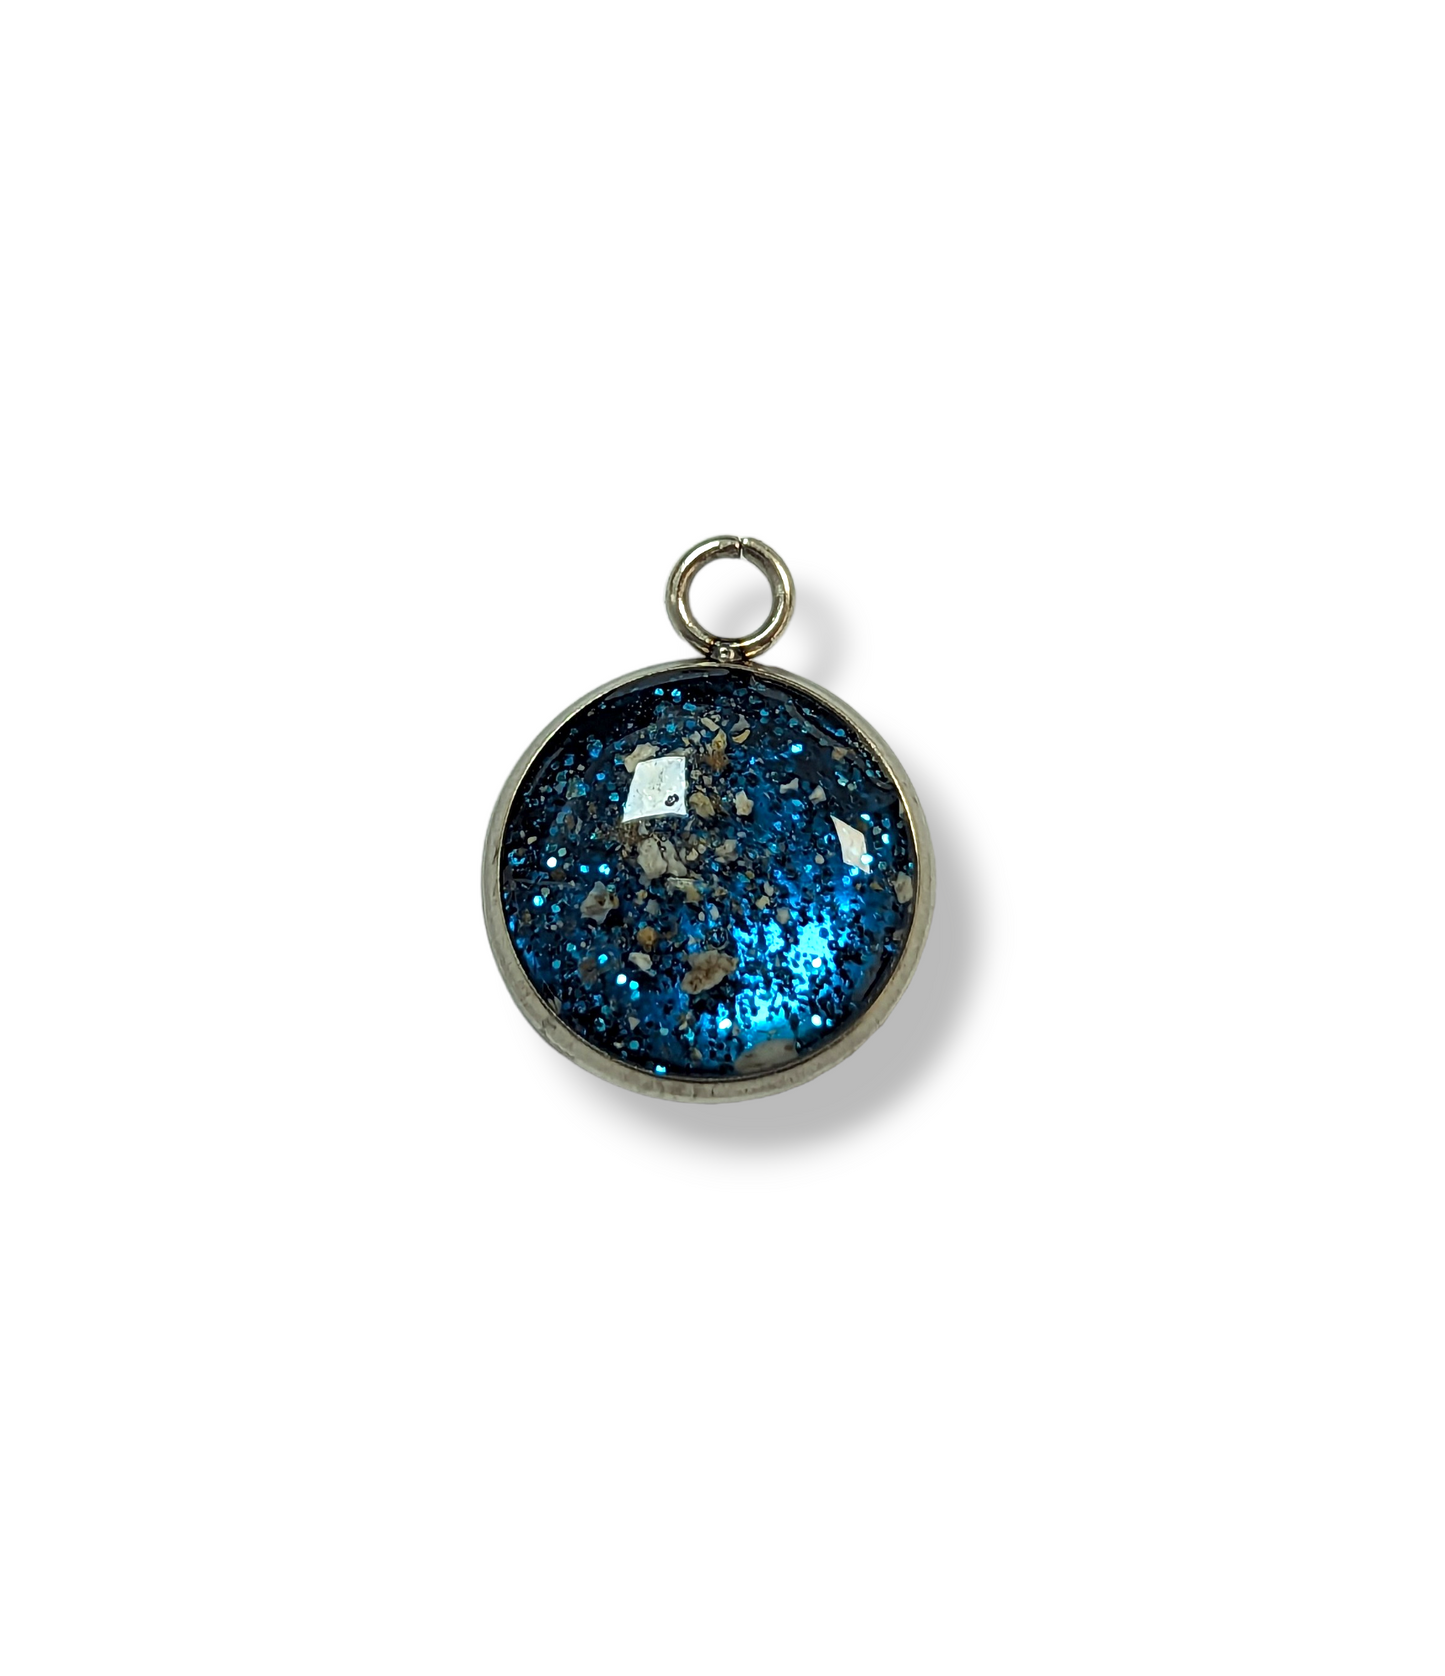 Ashes Charm Pendant with Lobster Clasp